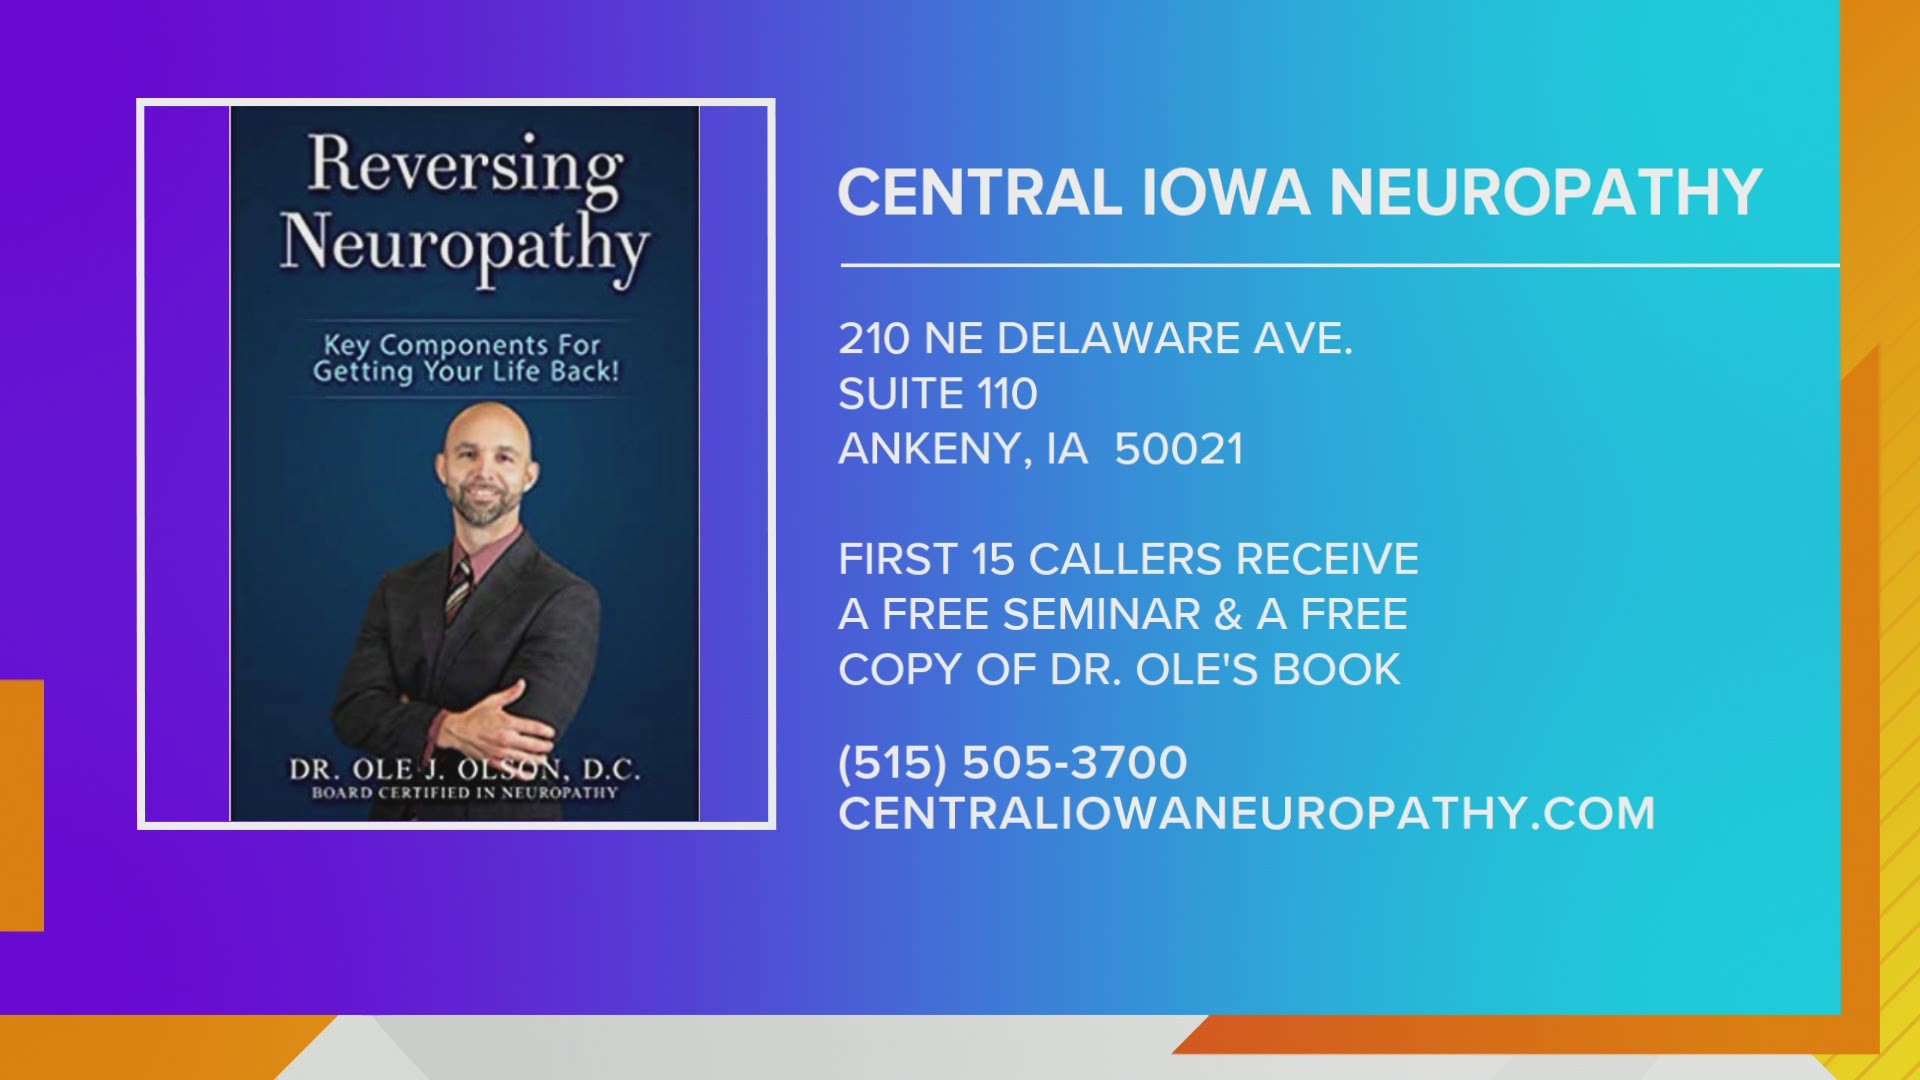 Dr. Ole Olson from Central Iowa Neuropathy discusses causes and treatment of peripheral neuropathy and offers FREE seminars beginning week of June 28 | PAID CONTENT